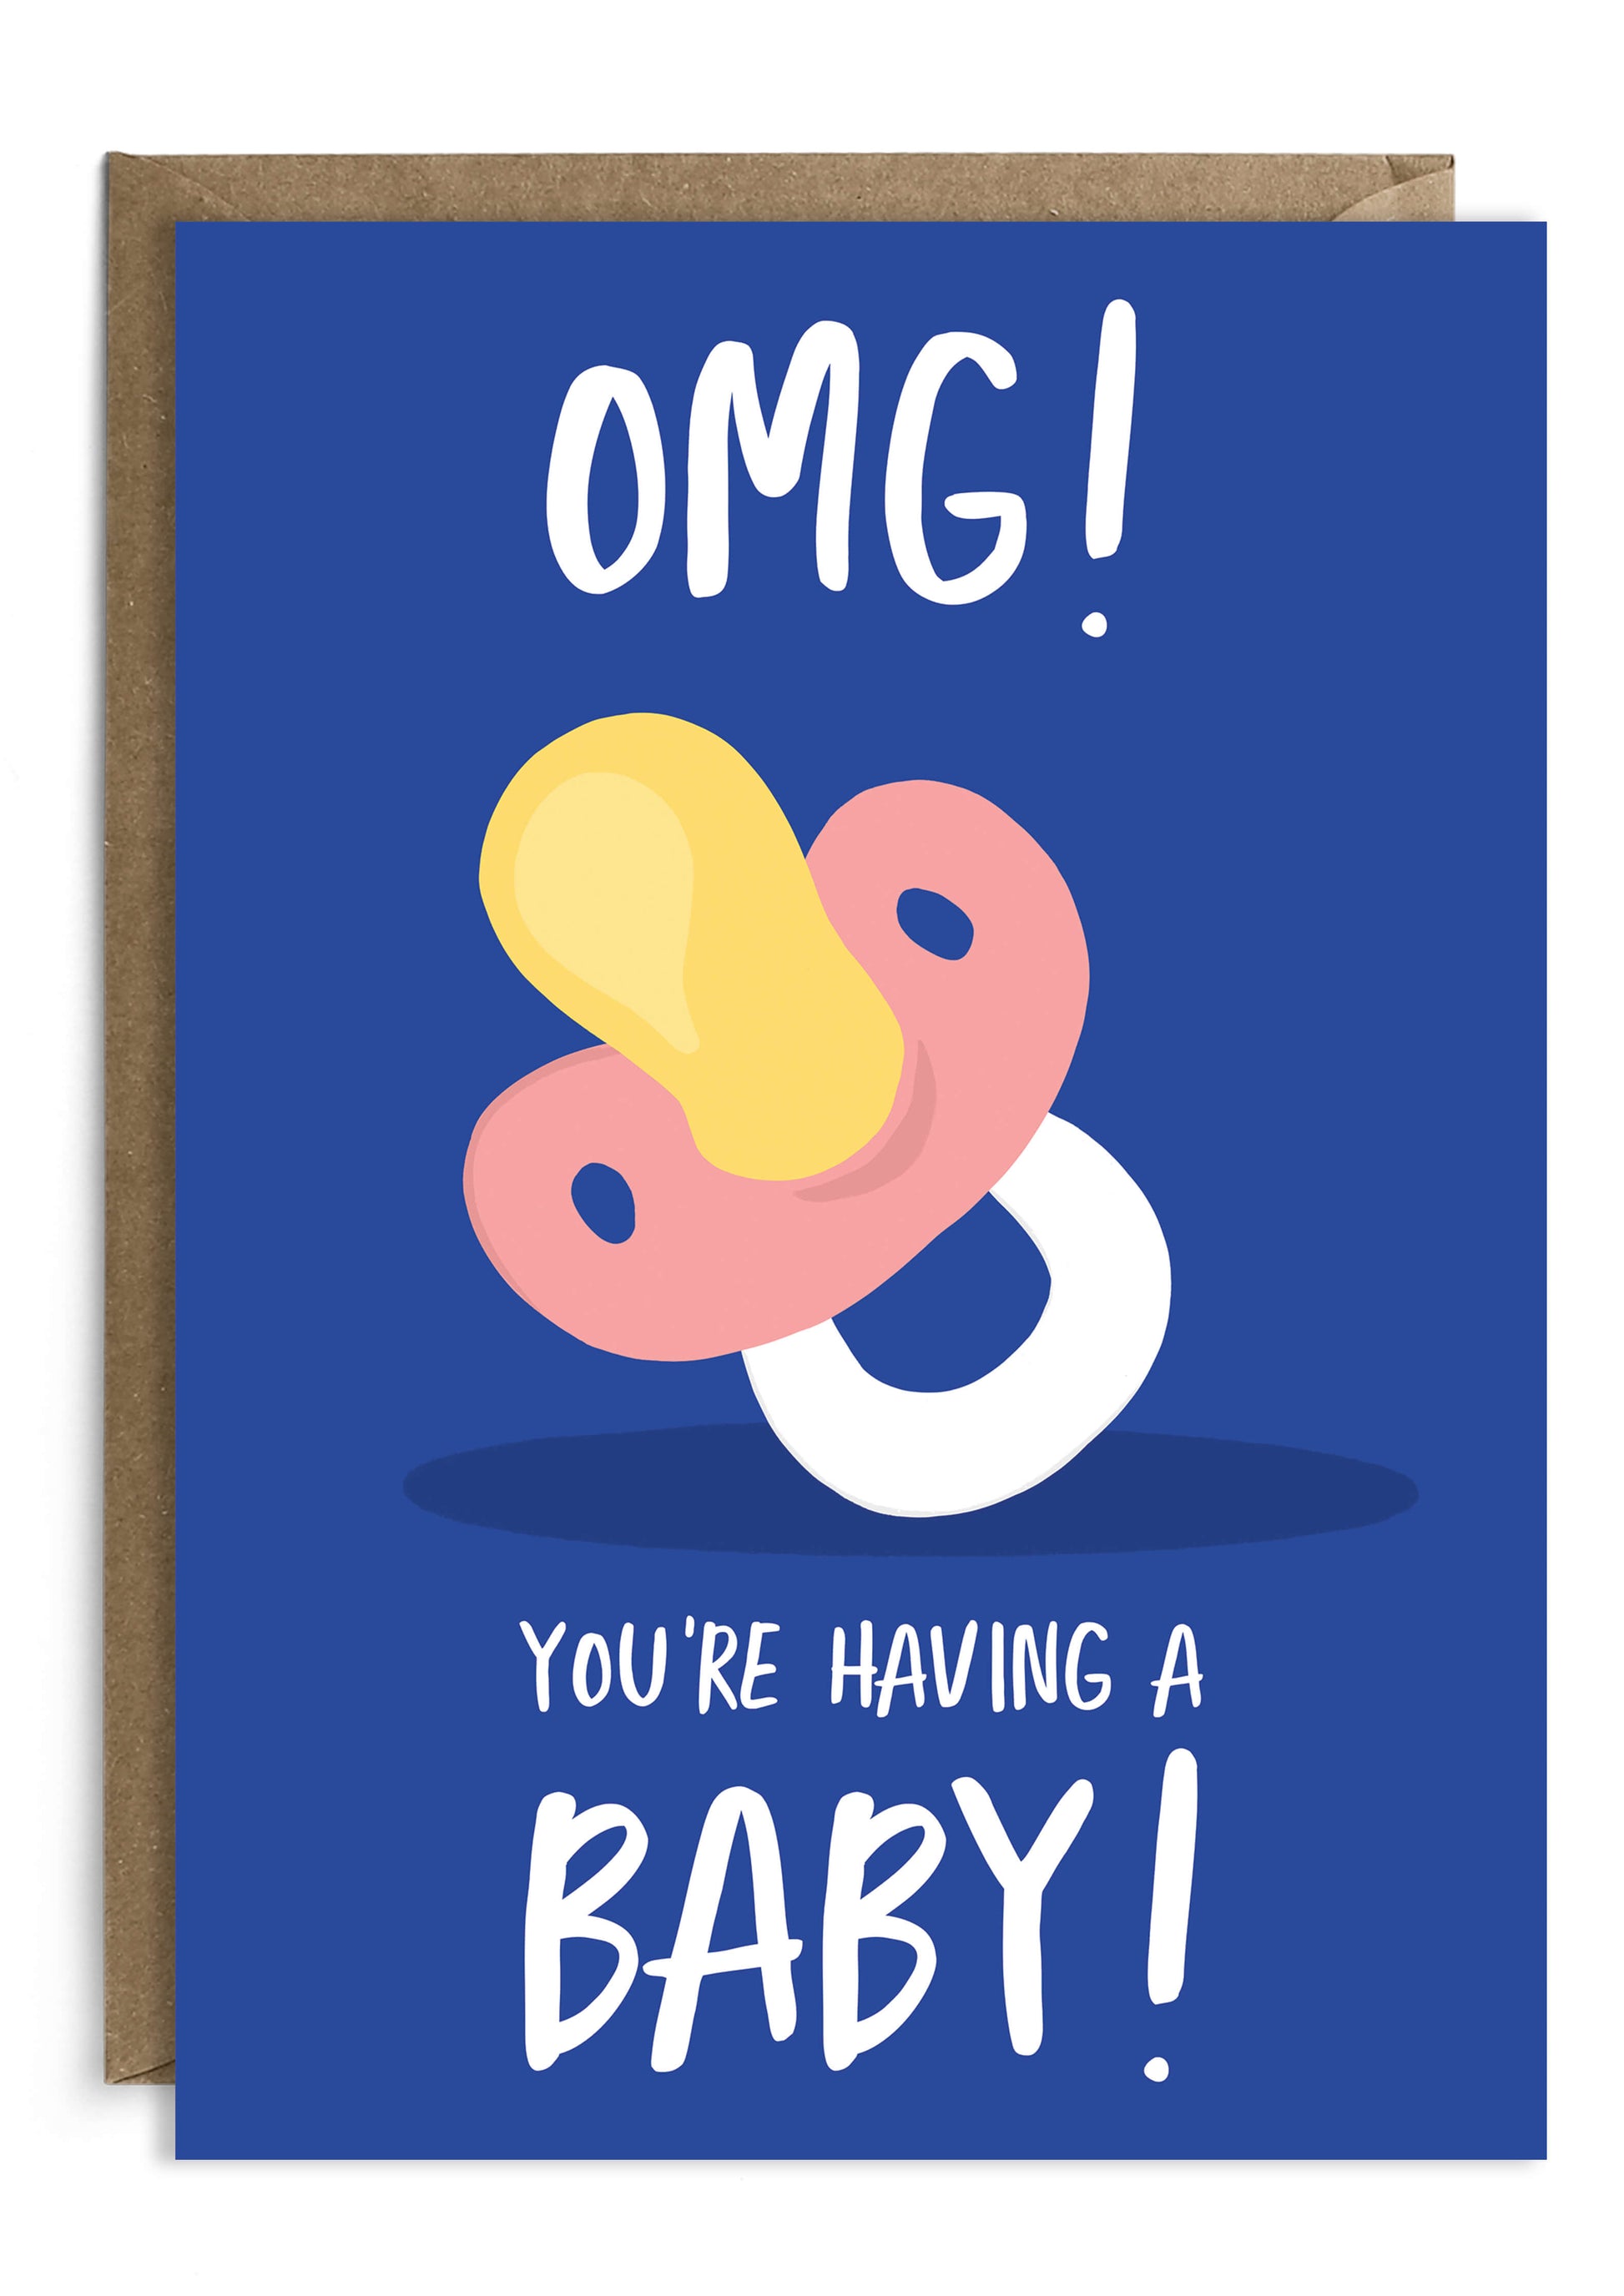 New baby card with illustrated pacifier in blue and pink